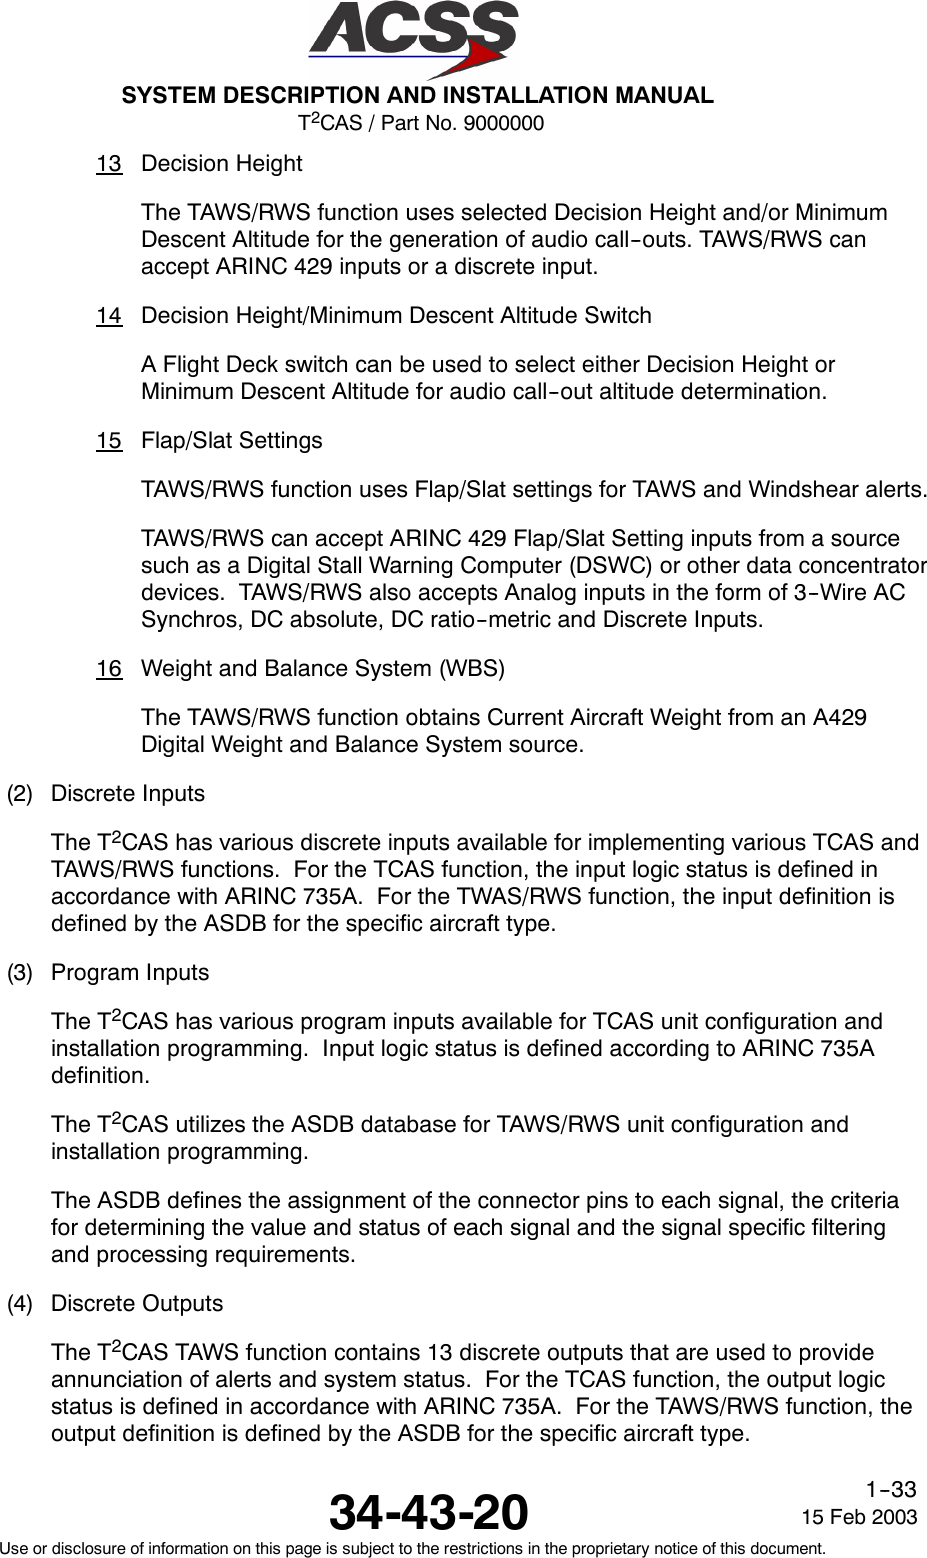 T2CAS / Part No. 9000000SYSTEM DESCRIPTION AND INSTALLATION MANUAL34-43-20 15 Feb 2003Use or disclosure of information on this page is subject to the restrictions in the proprietary notice of this document.1--3313 Decision HeightThe TAWS/RWS function uses selected Decision Height and/or MinimumDescent Altitude for the generation of audio call--outs. TAWS/RWS canaccept ARINC 429 inputs or a discrete input.14 Decision Height/Minimum Descent Altitude SwitchA Flight Deck switch can be used to select either Decision Height orMinimum Descent Altitude for audio call--out altitude determination.15 Flap/Slat SettingsTAWS/RWS function uses Flap/Slat settings for TAWS and Windshear alerts.TAWS/RWS can accept ARINC 429 Flap/Slat Setting inputs from a sourcesuch as a Digital Stall Warning Computer (DSWC) or other data concentratordevices. TAWS/RWS also accepts Analog inputs in the form of 3--Wire ACSynchros, DC absolute, DC ratio--metric and Discrete Inputs.16 Weight and Balance System (WBS)The TAWS/RWS function obtains Current Aircraft Weight from an A429Digital Weight and Balance System source.(2) Discrete InputsThe T2CAS has various discrete inputs available for implementing various TCAS andTAWS/RWS functions. For the TCAS function, the input logic status is defined inaccordance with ARINC 735A. For the TWAS/RWS function, the input definition isdefined by the ASDB for the specific aircraft type.(3) Program InputsThe T2CAS has various program inputs available for TCAS unit configuration andinstallation programming. Input logic status is defined according to ARINC 735Adefinition.The T2CAS utilizes the ASDB database for TAWS/RWS unit configuration andinstallation programming.The ASDB defines the assignment of the connector pins to each signal, the criteriafor determining the value and status of each signal and the signal specific filteringand processing requirements.(4) Discrete OutputsThe T2CAS TAWS function contains 13 discrete outputs that are used to provideannunciation of alerts and system status. For the TCAS function, the output logicstatus is defined in accordance with ARINC 735A. For the TAWS/RWS function, theoutput definition is defined by the ASDB for the specific aircraft type.